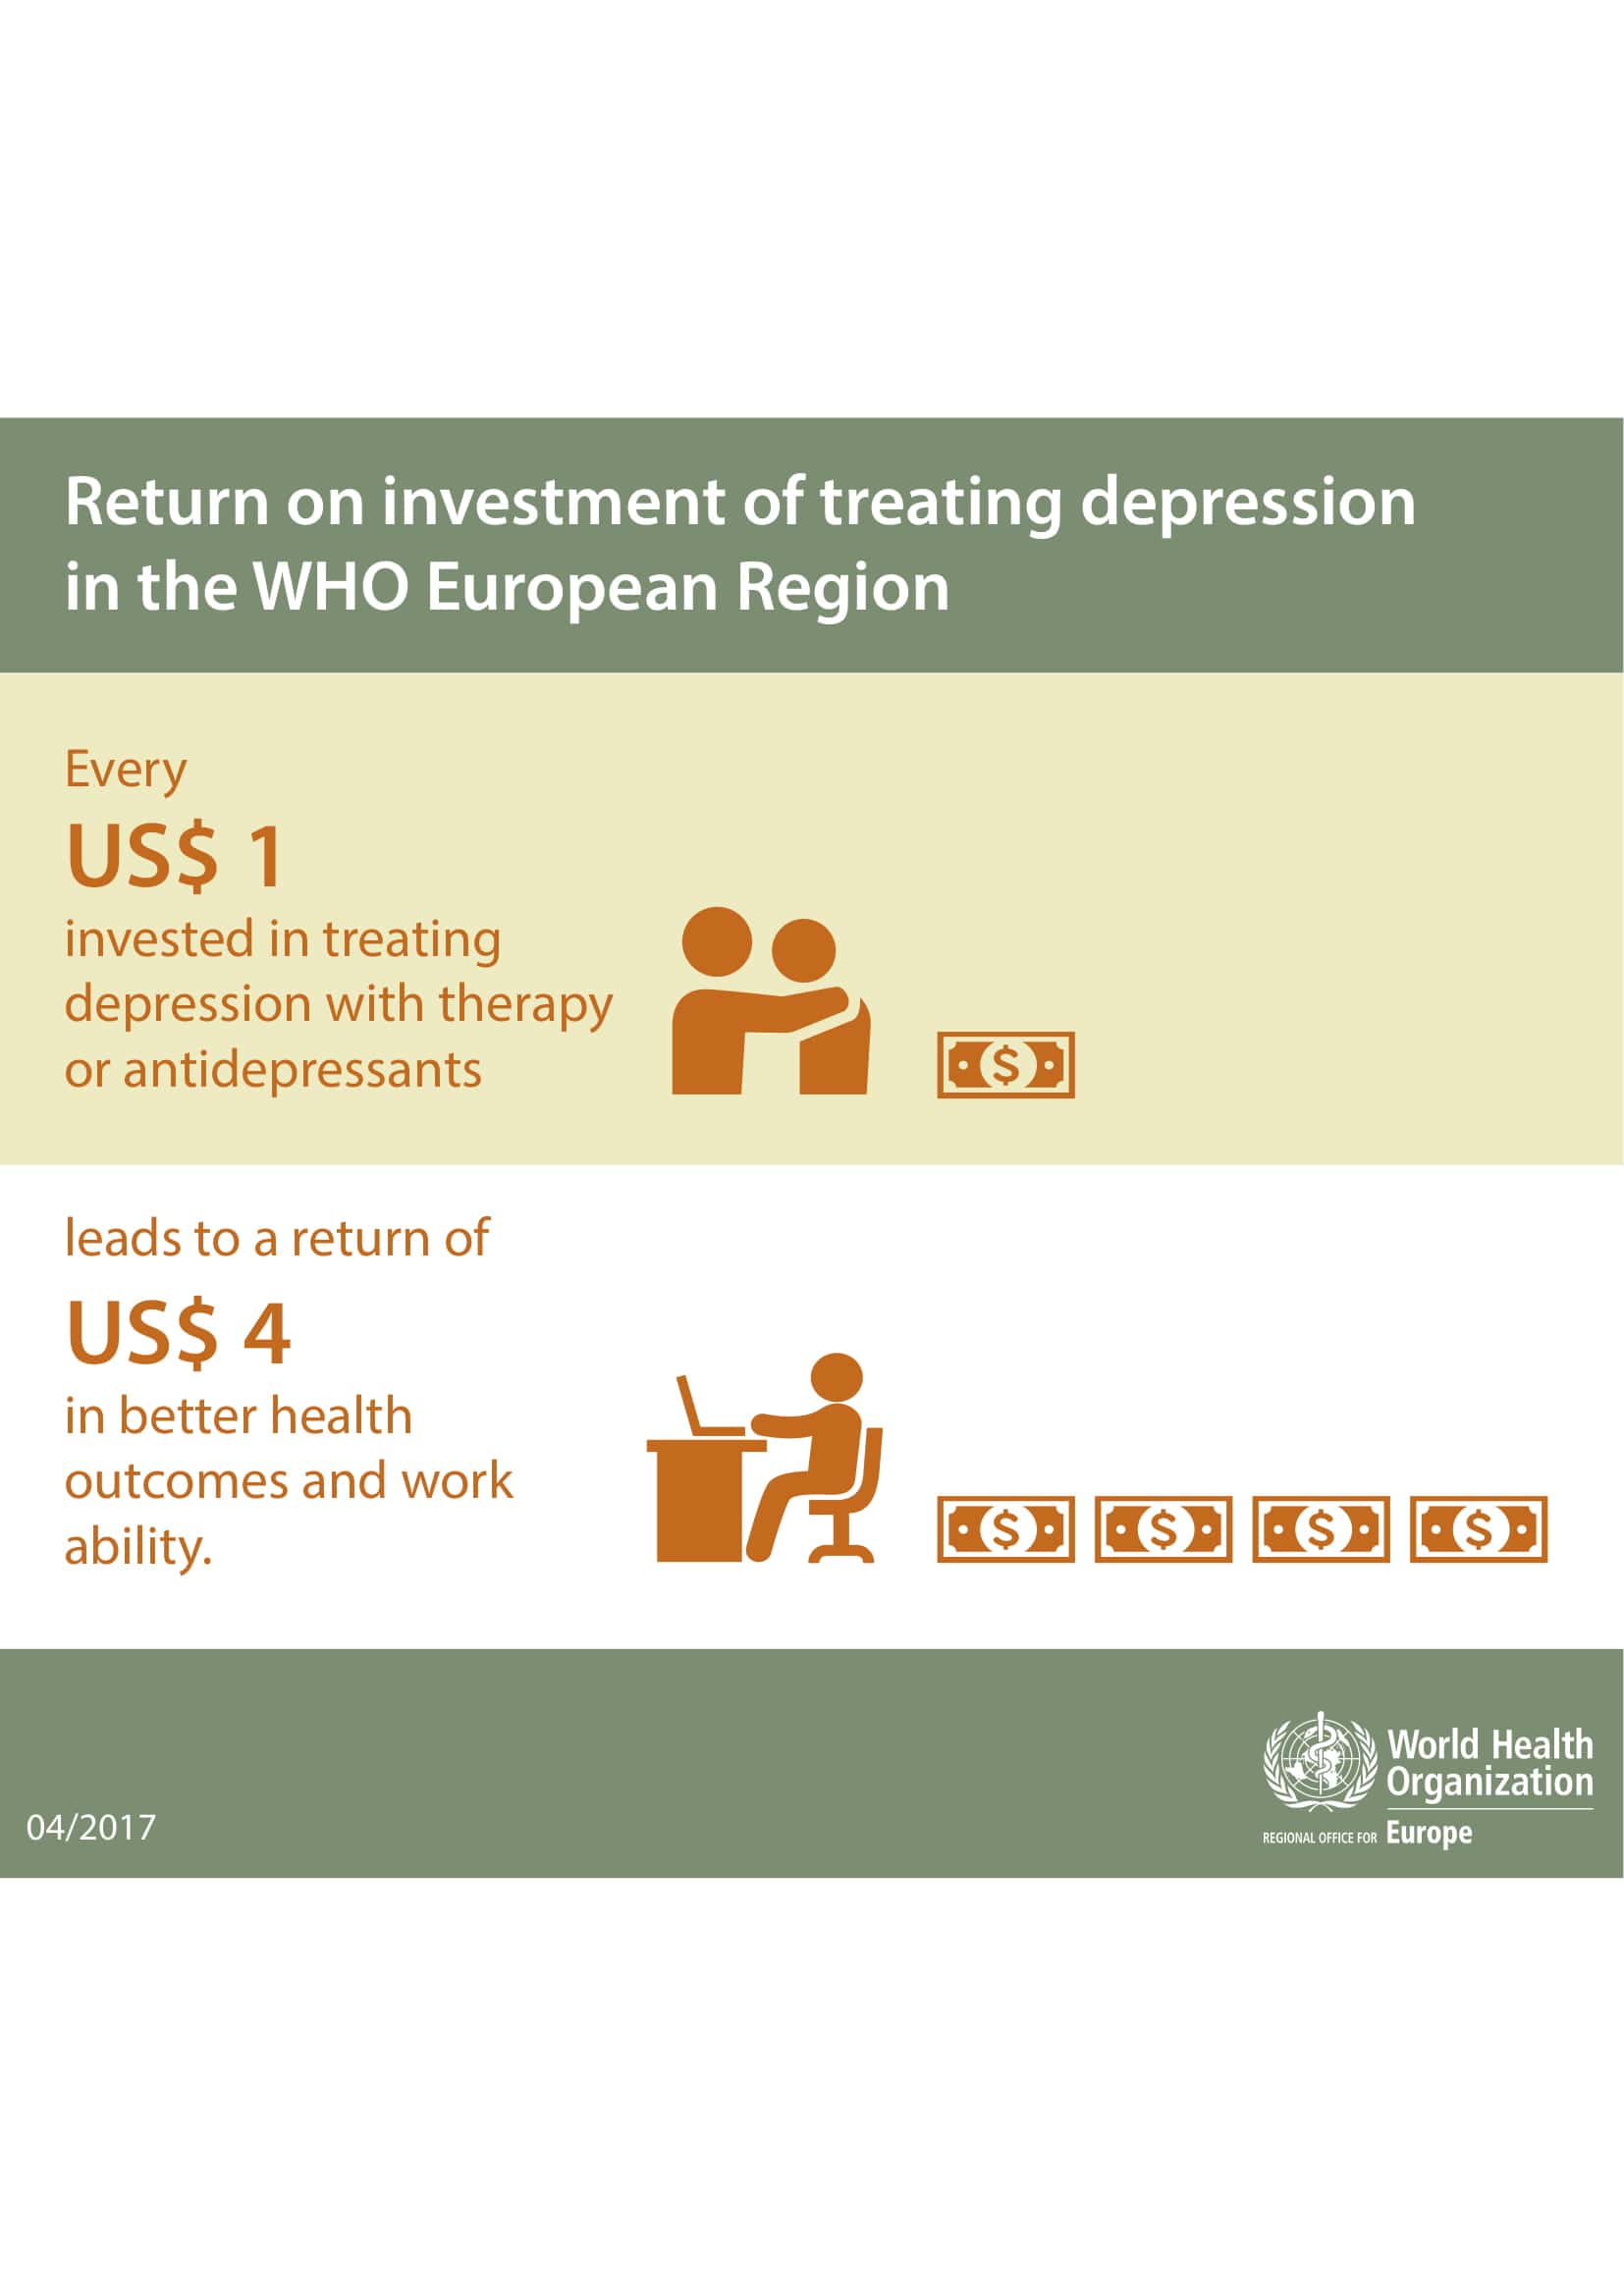 Return on investment of treating depression in the WHO European Region